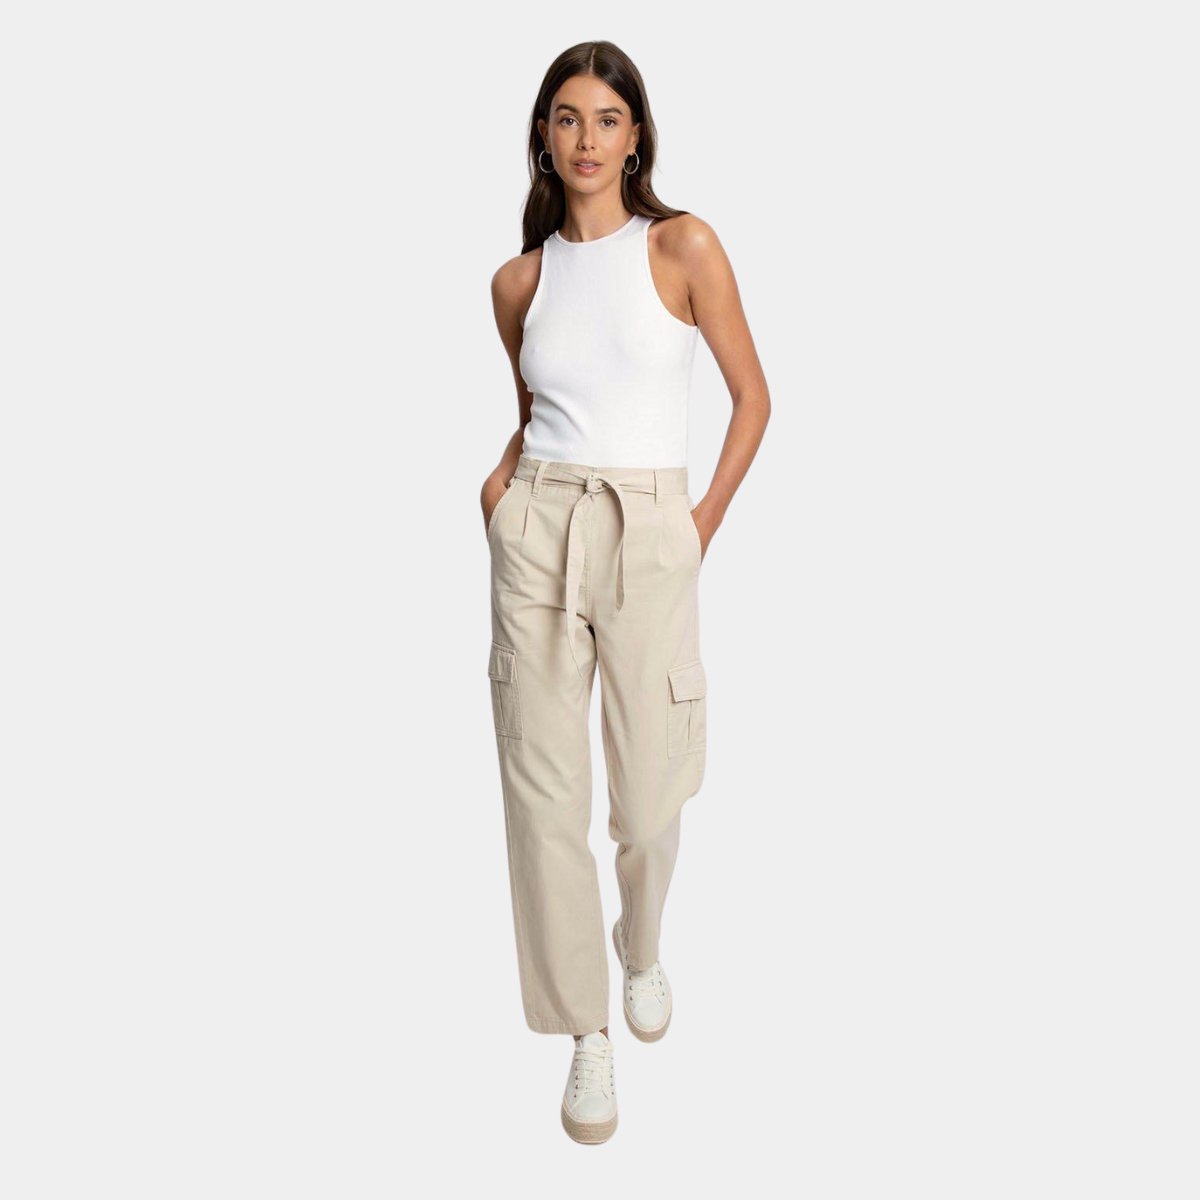 TIMEMEANS Fashion Casual New Ladies Pants Women High India | Ubuy